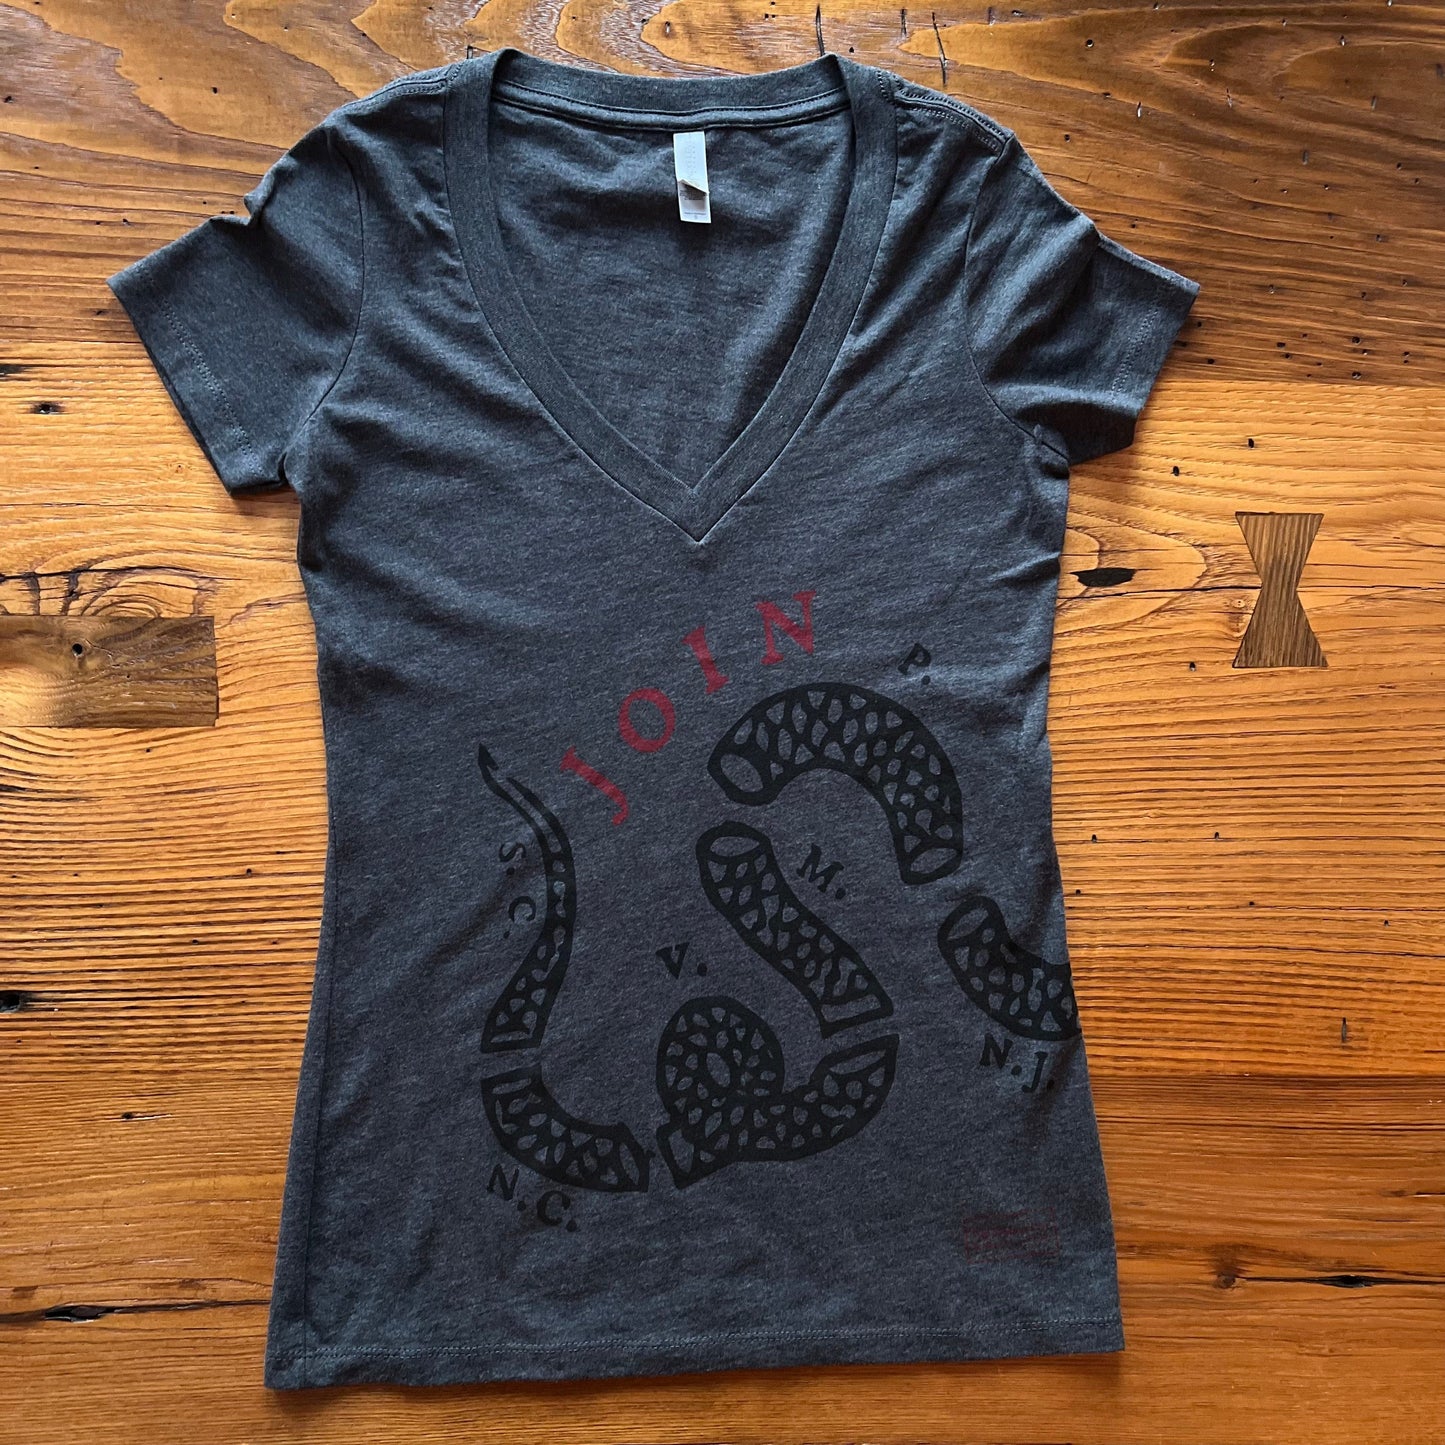 "Join or Die" V-neck shirt - Charcoal grey from the history list store